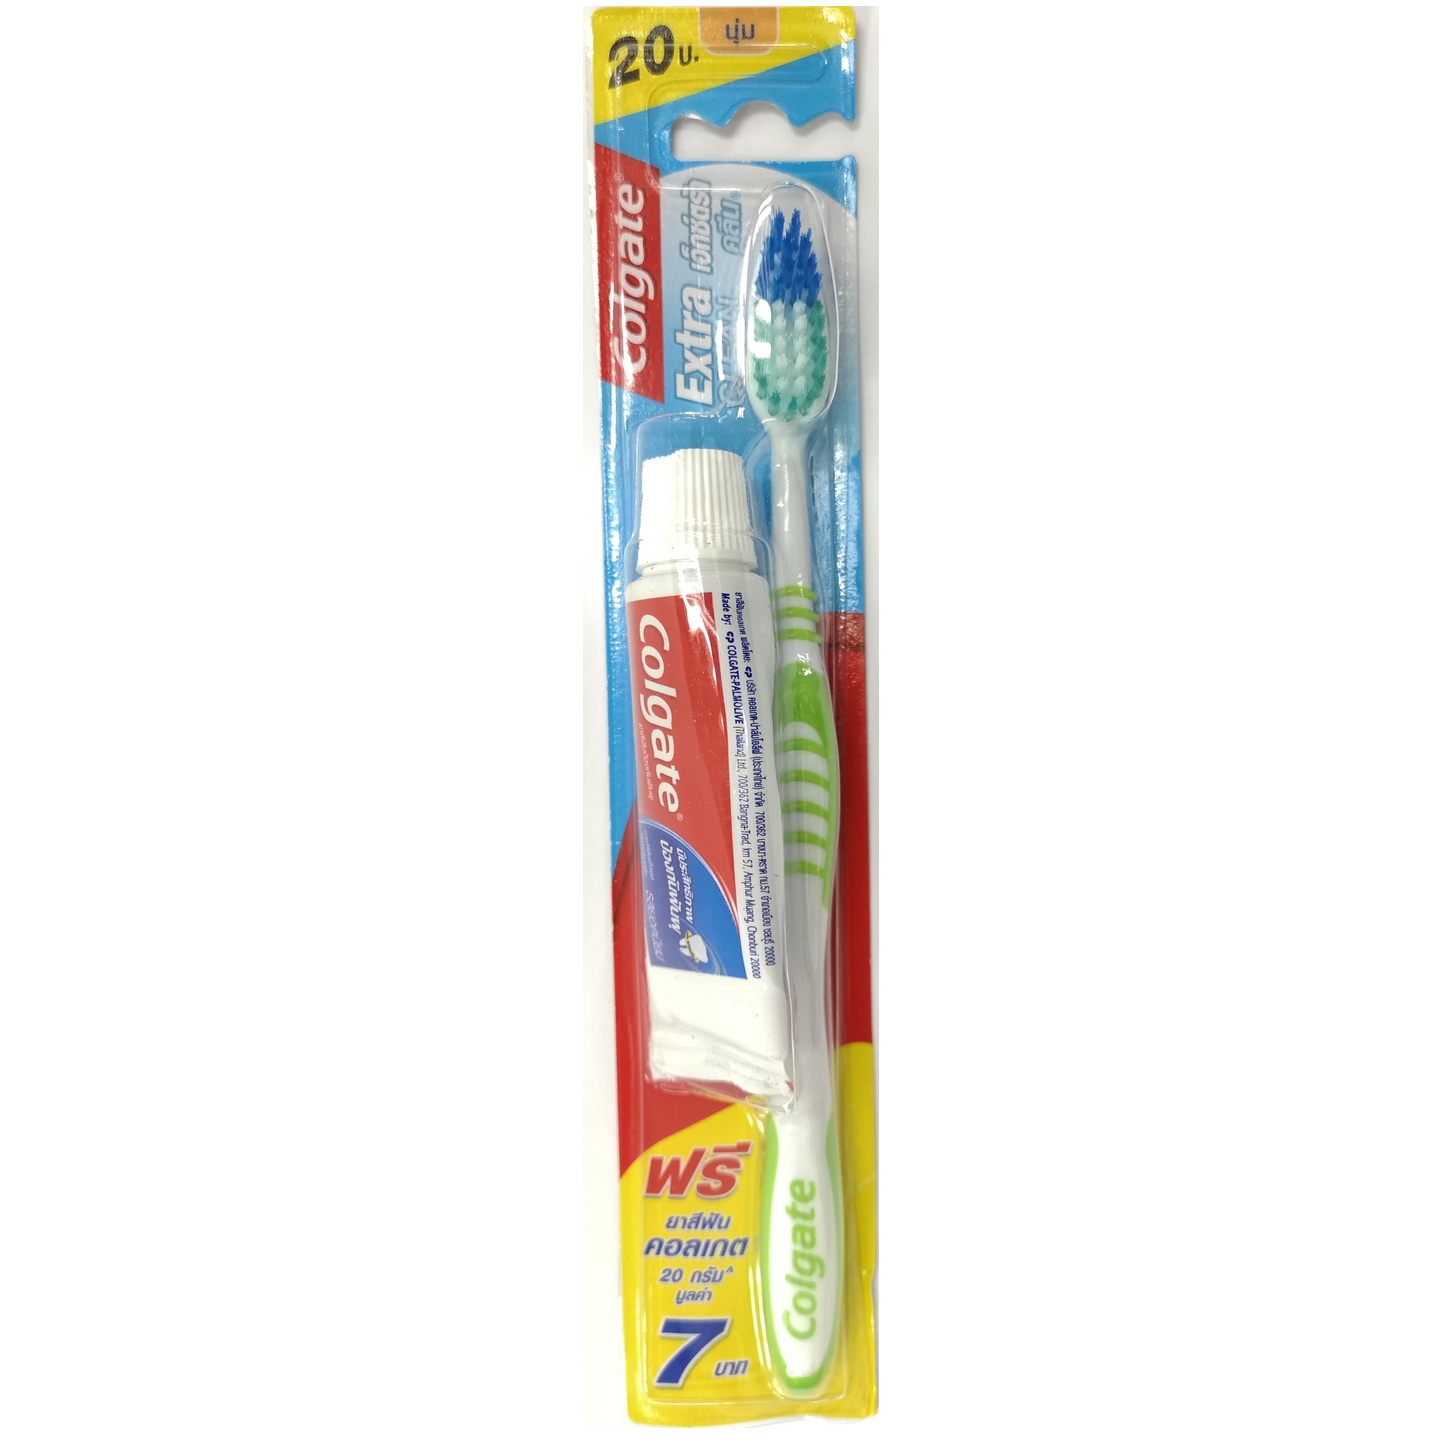 Colgate Extra Clean Toothbrush & Toothpaste Travel Kit 20g